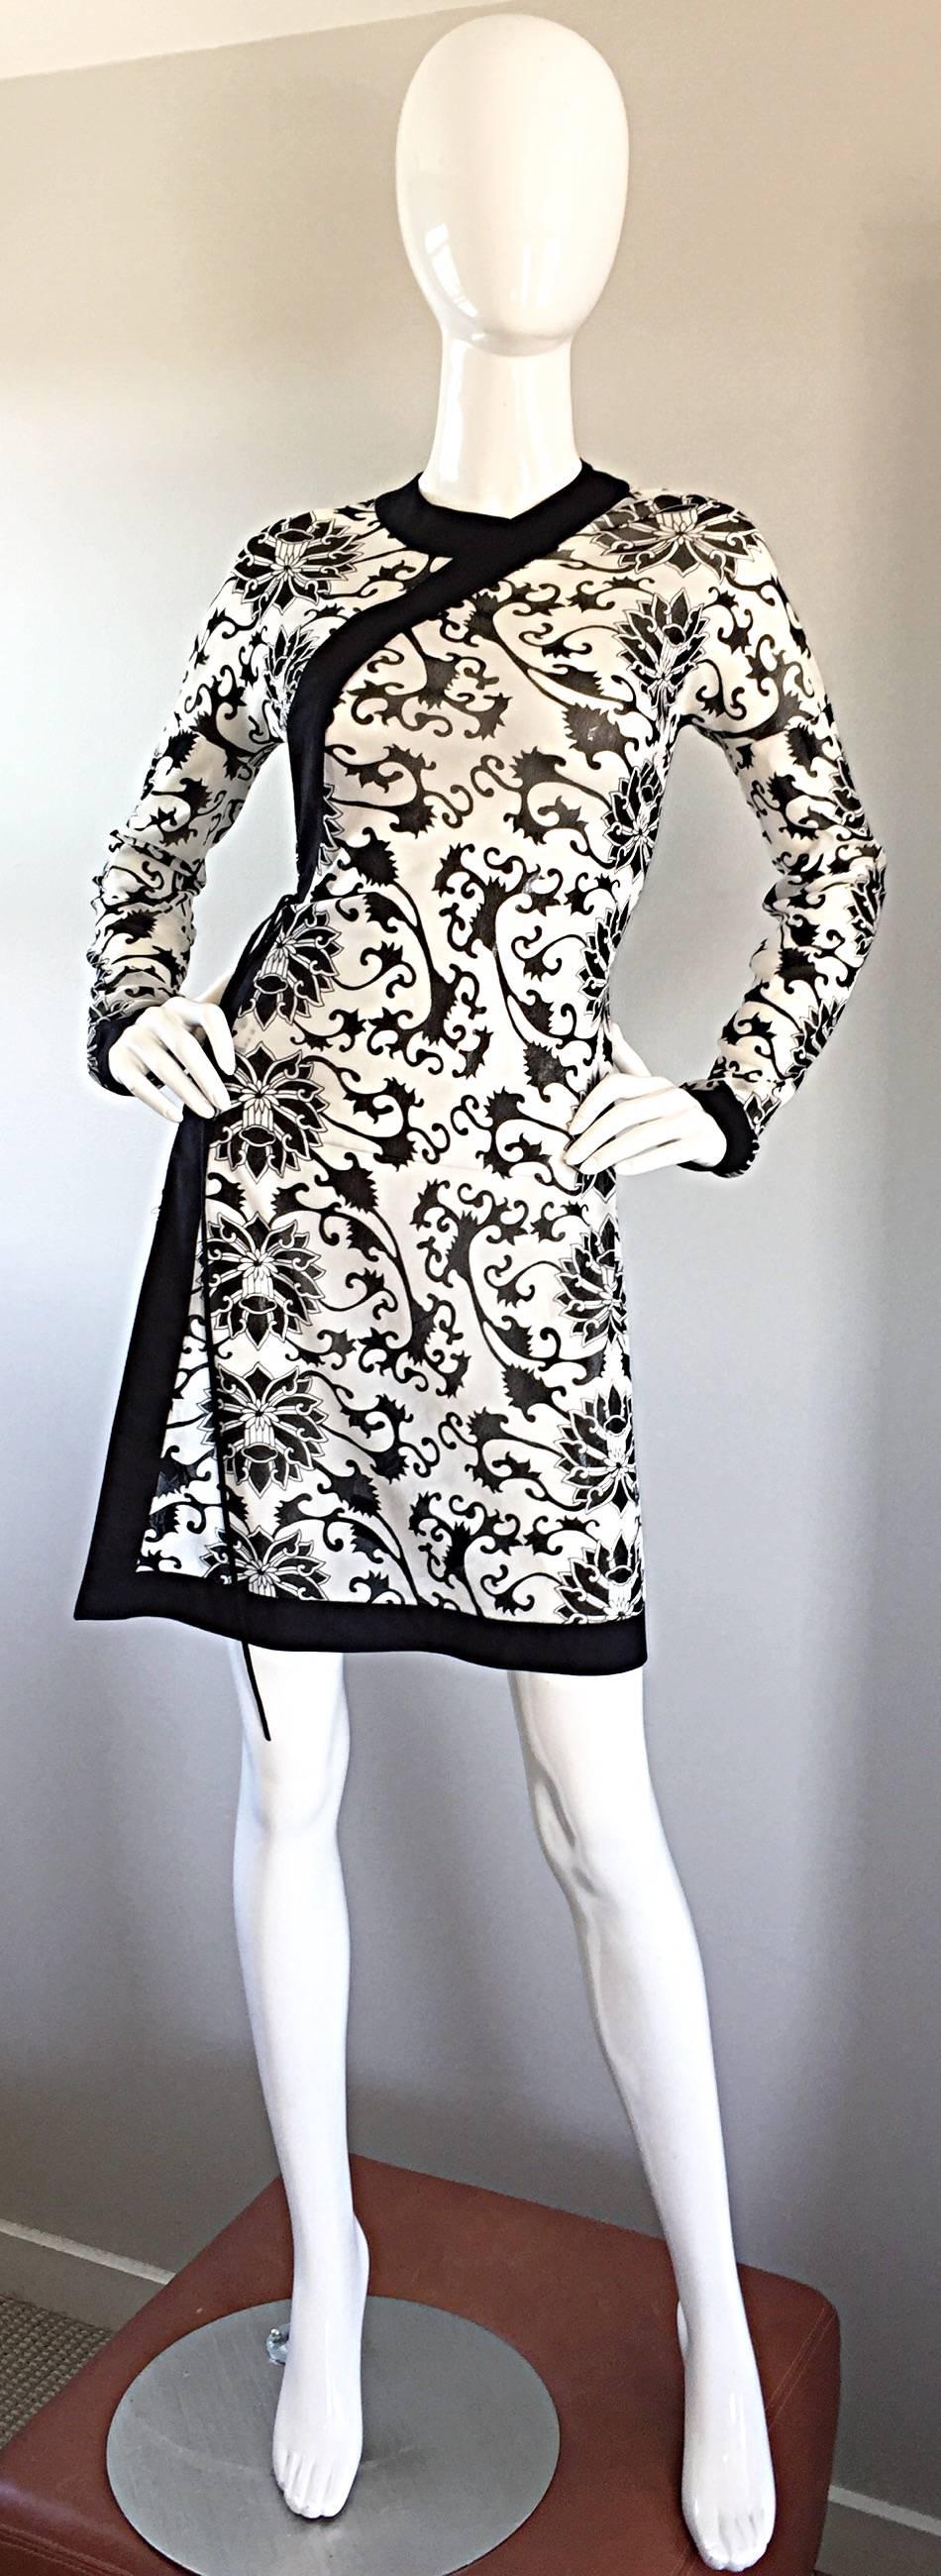 Super rare early 90s VIVIENNE TAM black and white 'tattoo' print semi-sheer wrap dress! Asian inspired fit, which wraps around to the side, with snaps up the side bodice. Looks amazing with boots or heels! Great fit, that will stretch to fit an